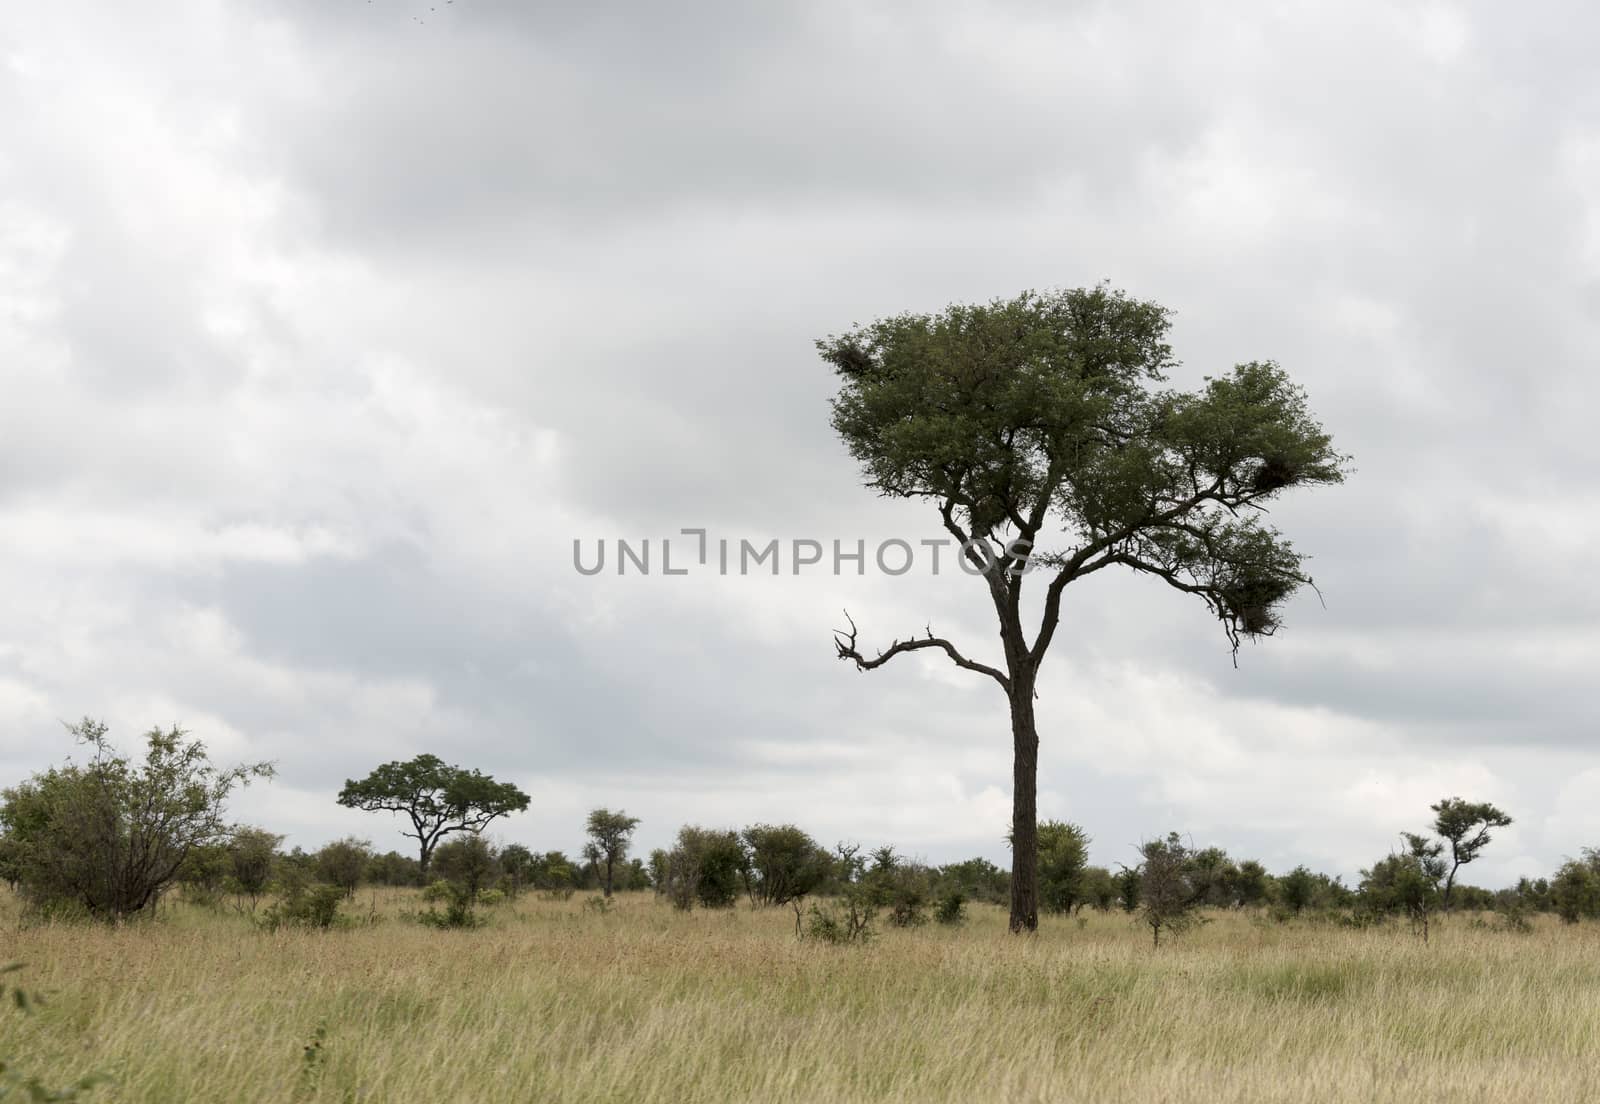 safari in kruger national park south africa by compuinfoto